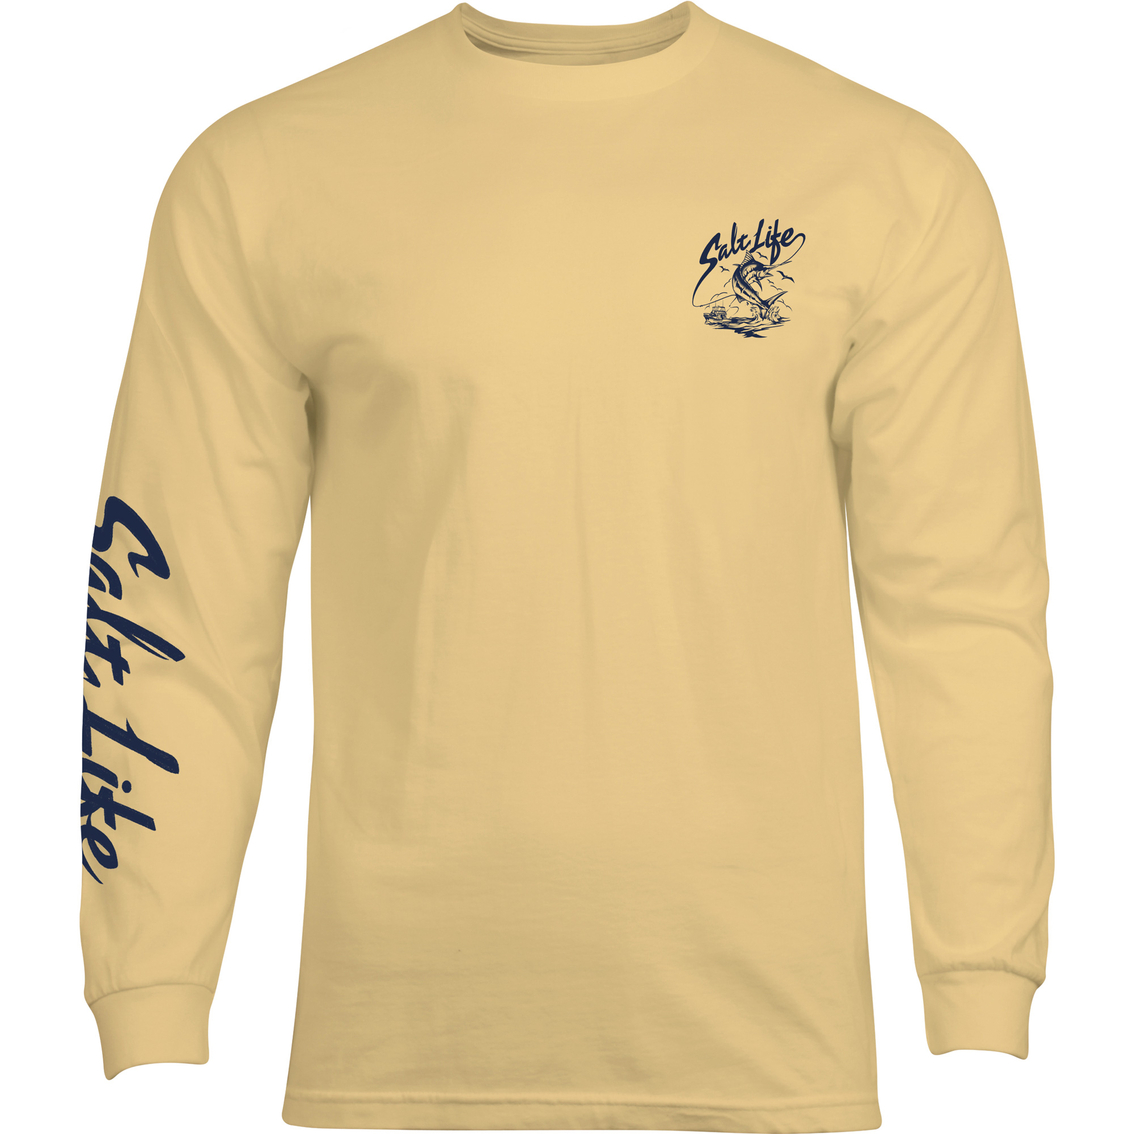 Salt Life One More Cast Tee, Shirts, Clothing & Accessories